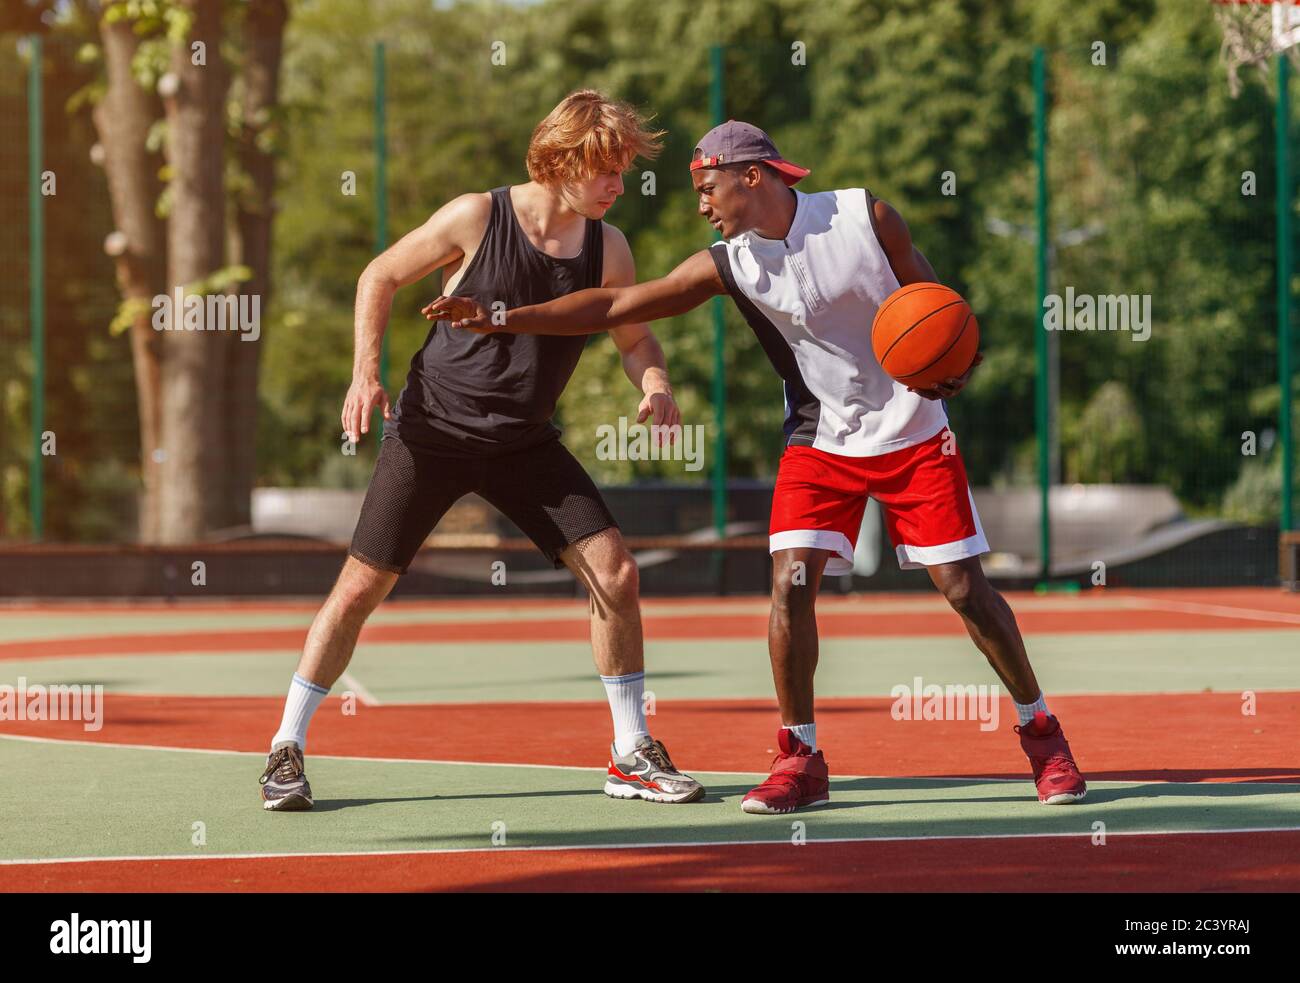 Professional basketball players on outdoor court during friendly game Stock Photo